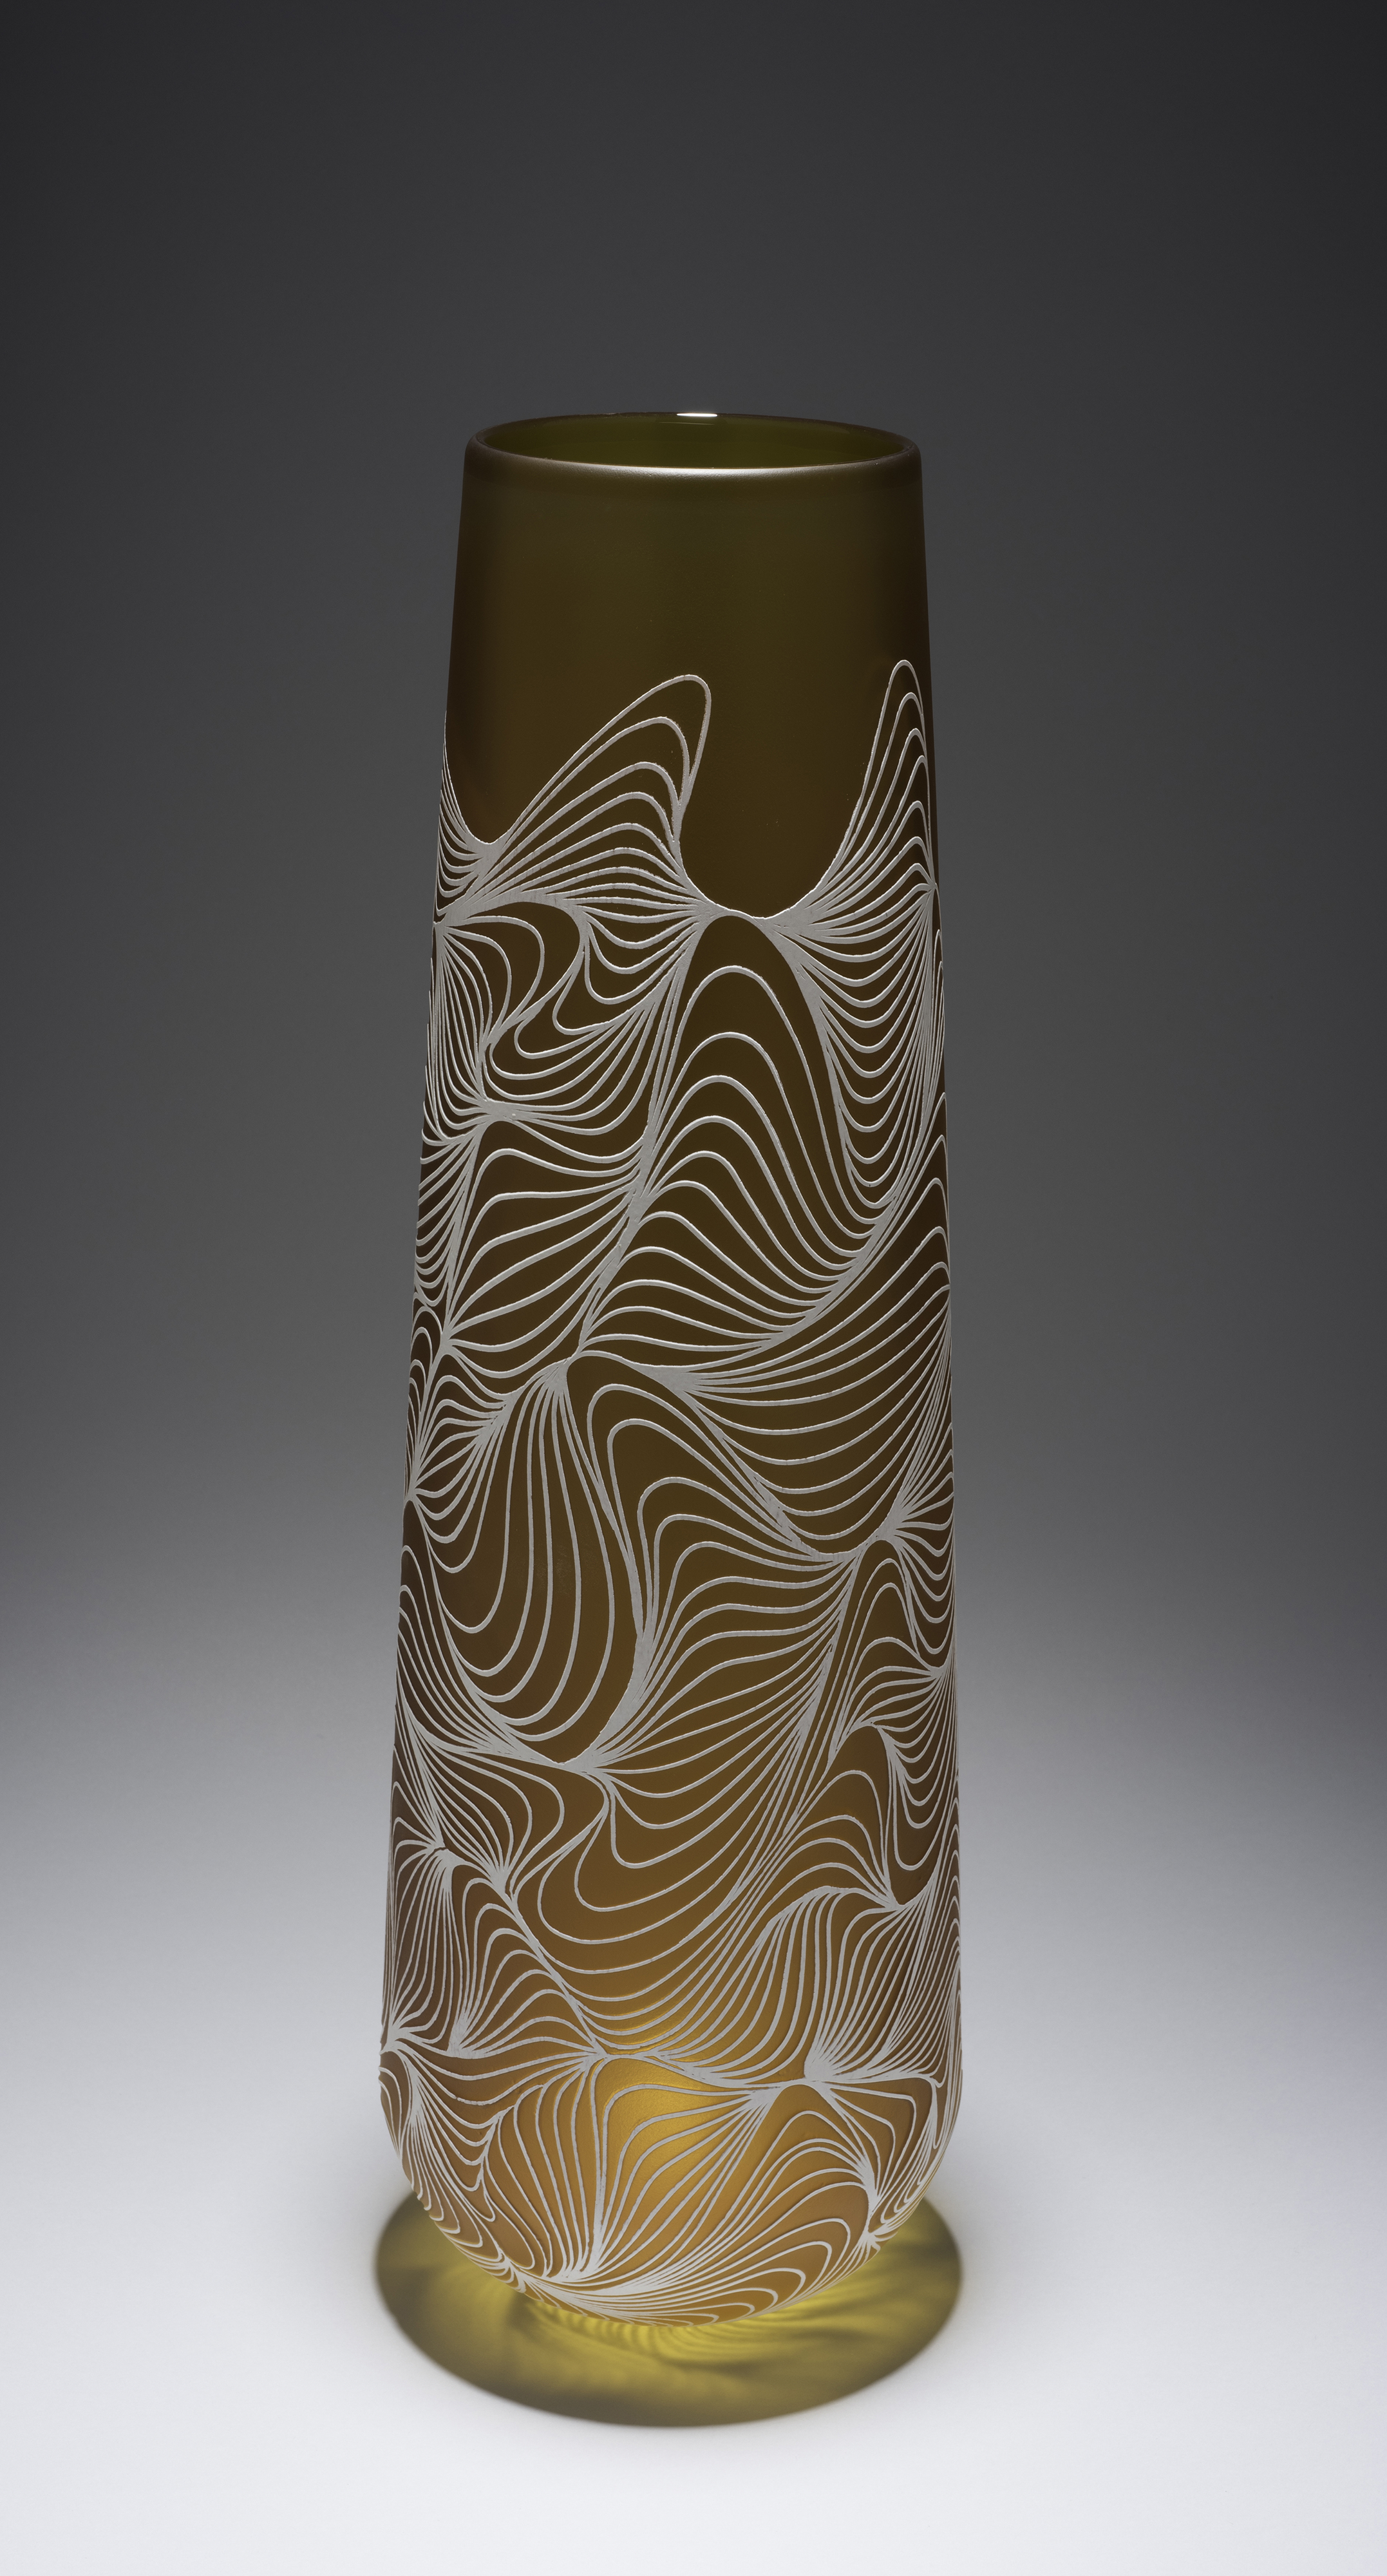  Armelle Bouchet O’Neill (French, born 1980).&nbsp; Kasvu,  Made at the Museum in 2013.&nbsp;Blown, etched, and sand-carved glass;&nbsp;21 1/2 x 6 x 8 3/4 in.&nbsp;Collection of Museum of Glass, Tacoma, Washington, gift of the artist.&nbsp;Photo by D